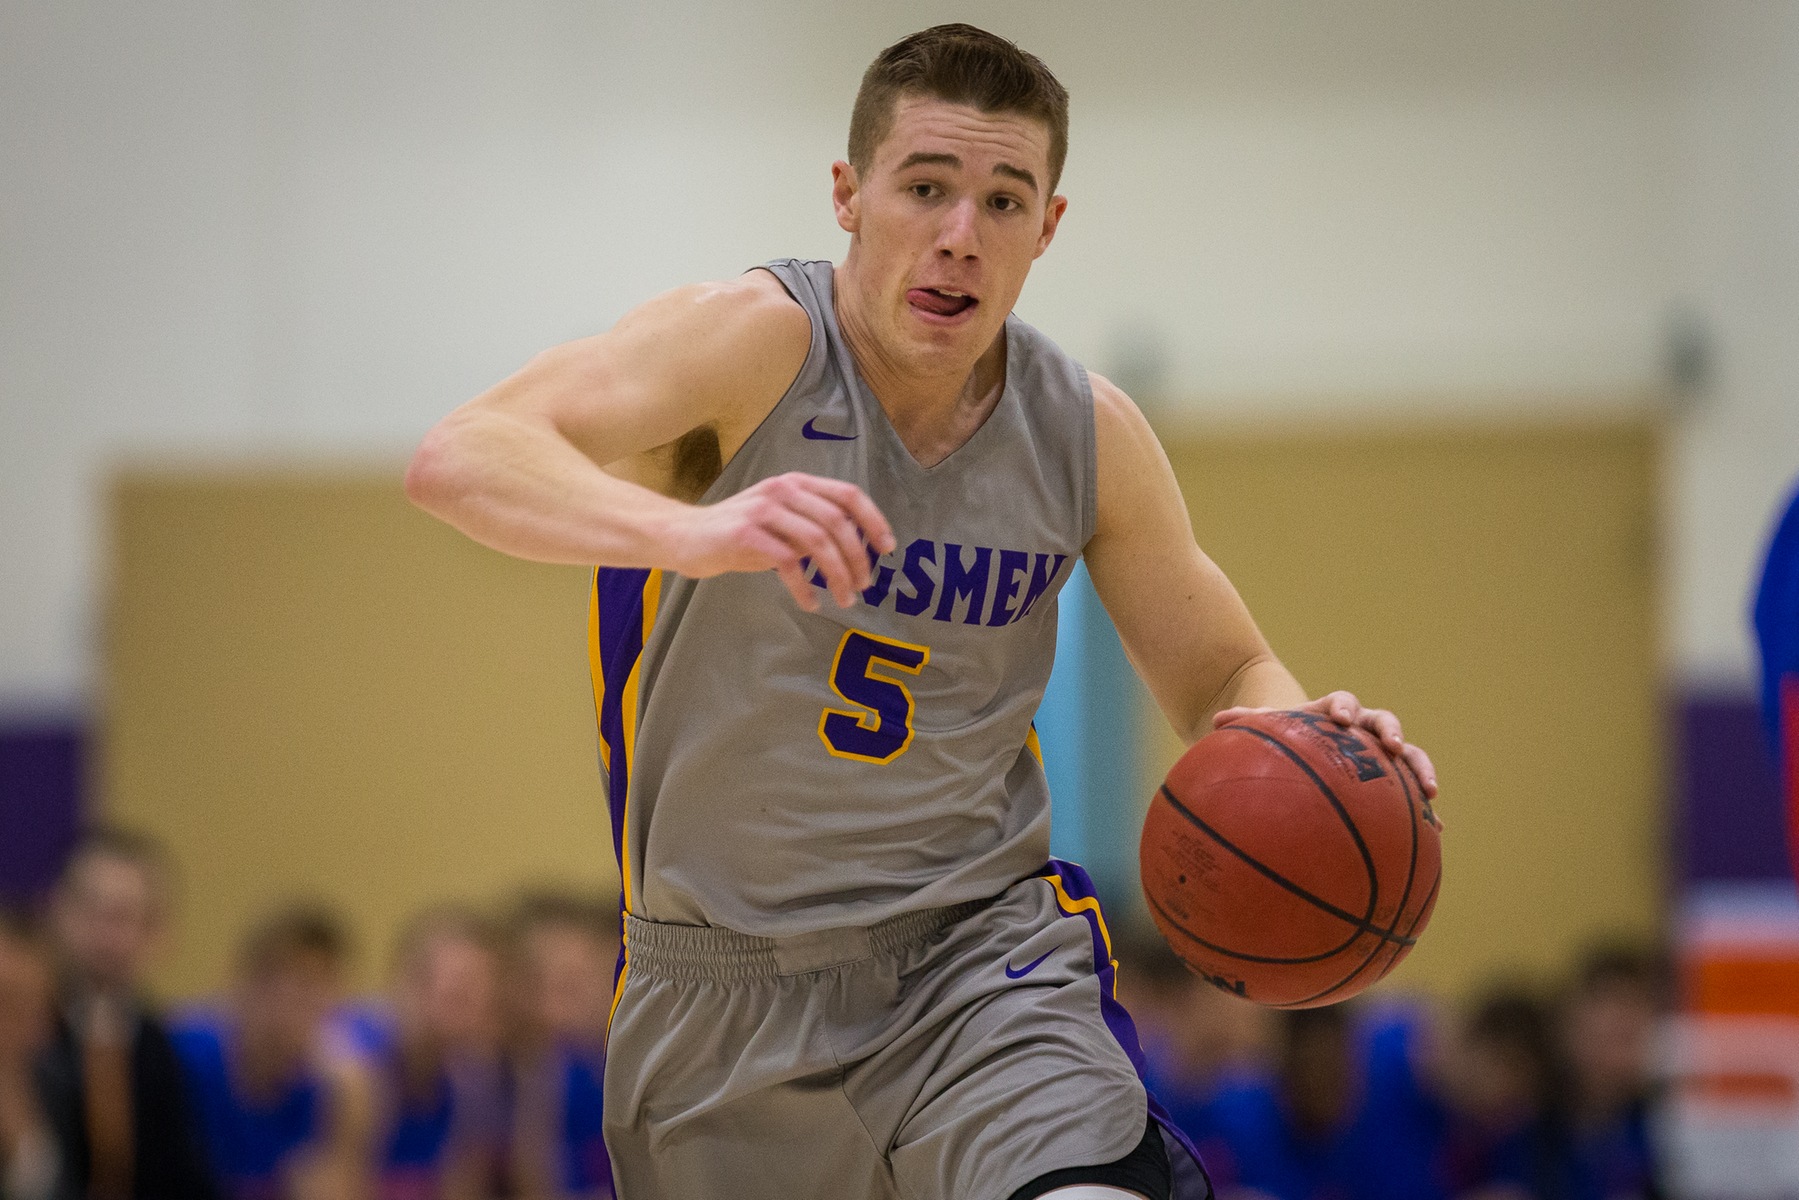 Kyle Ferreira scored 19 points and pulled down 9 rebounds as Cal Lutheran defeated Linfield 85-81.